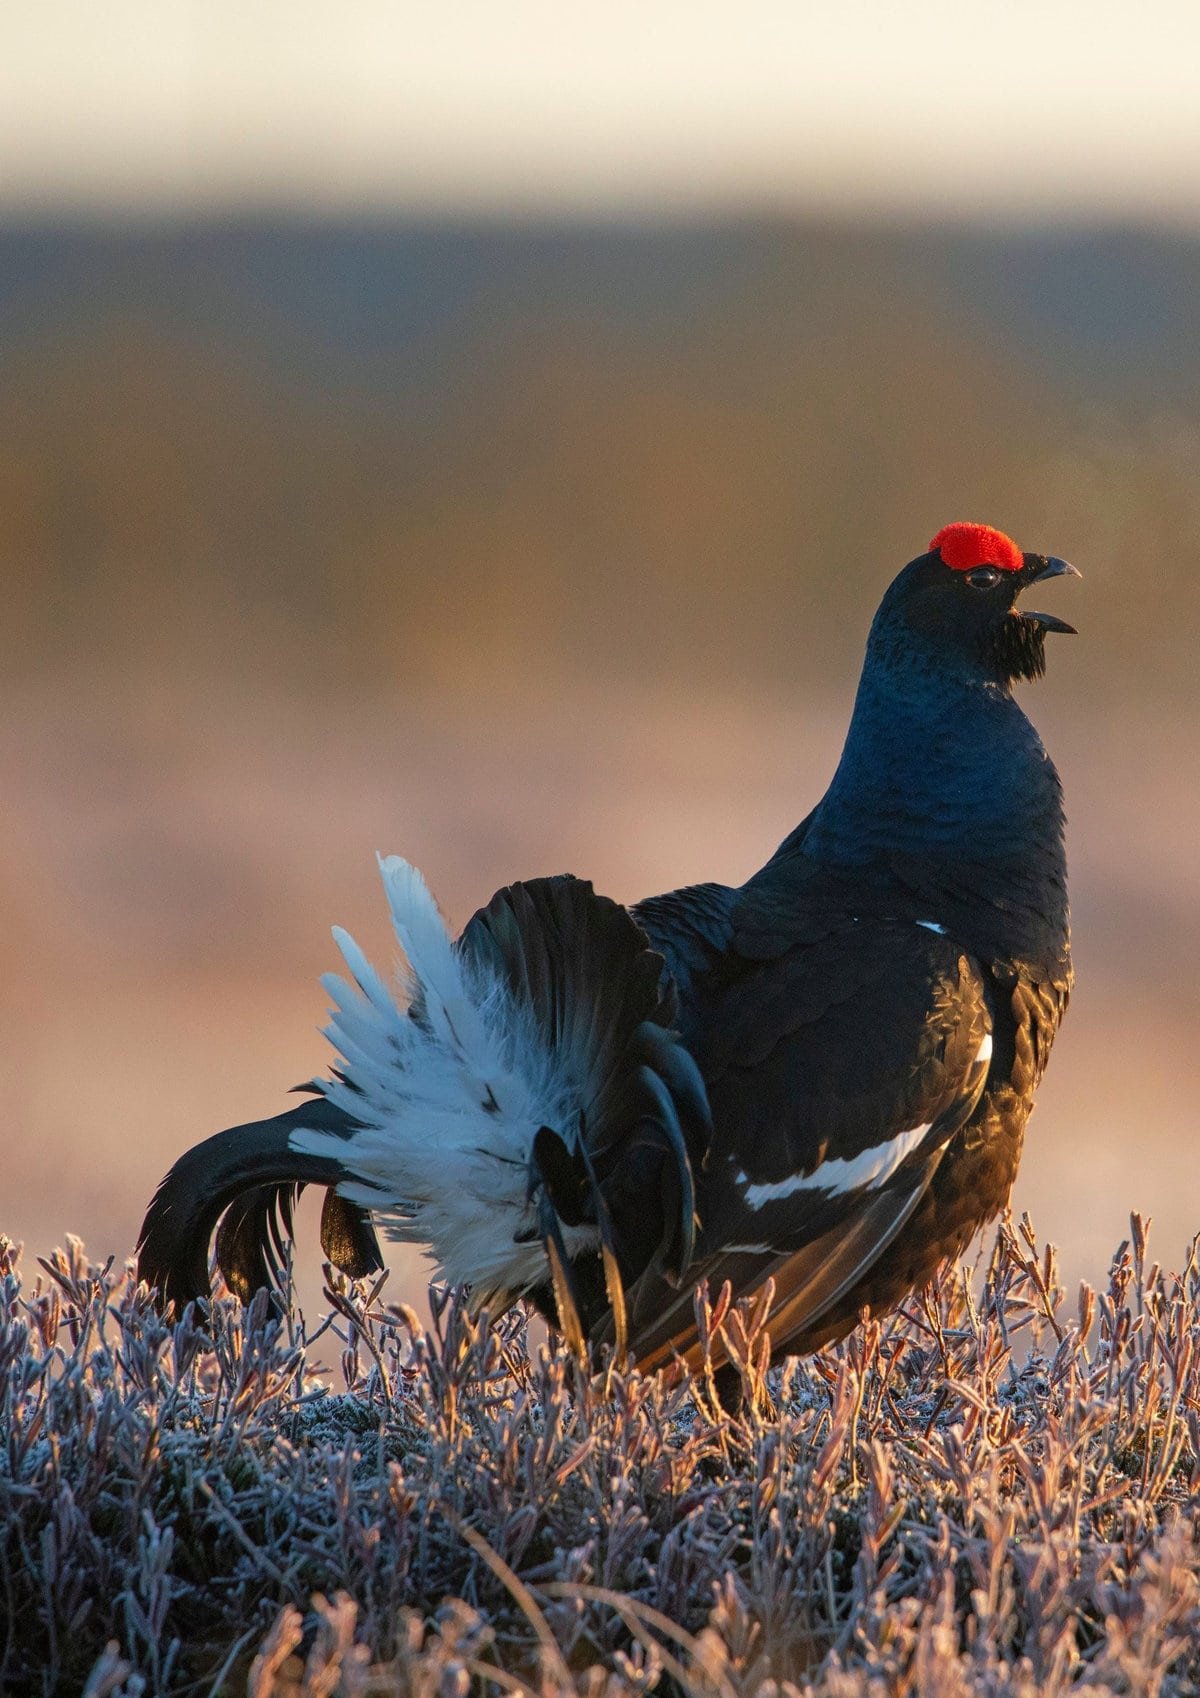 A black grouse in a swamp